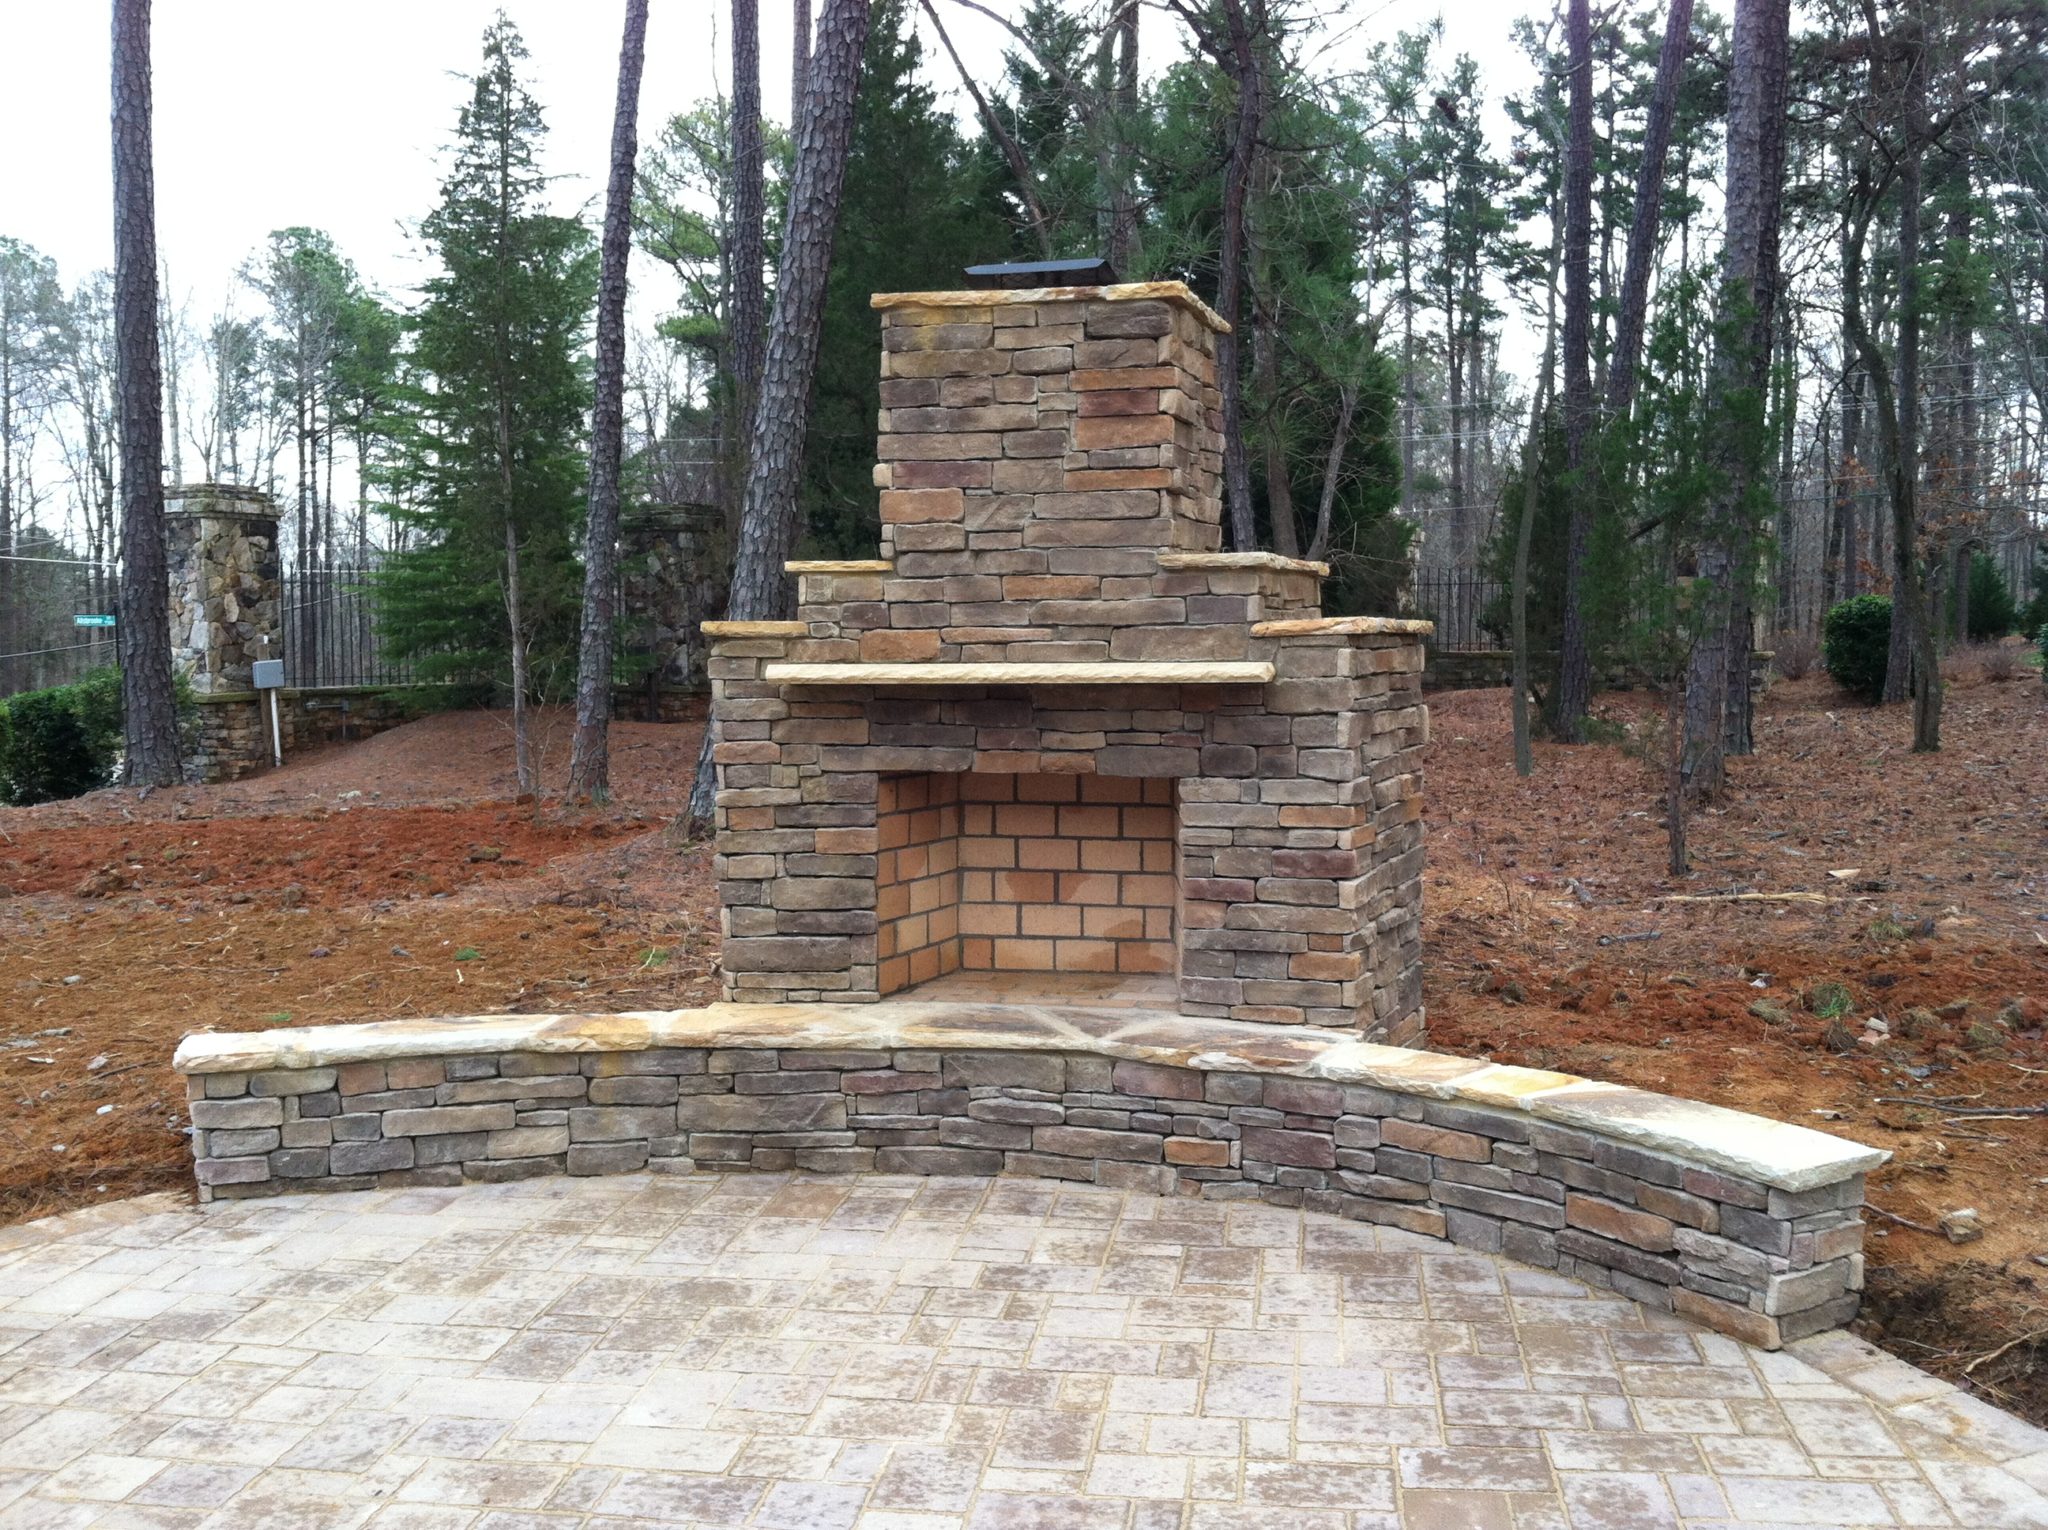 Outdoor living space with stone fireplace, retaining wall and custom paver patio